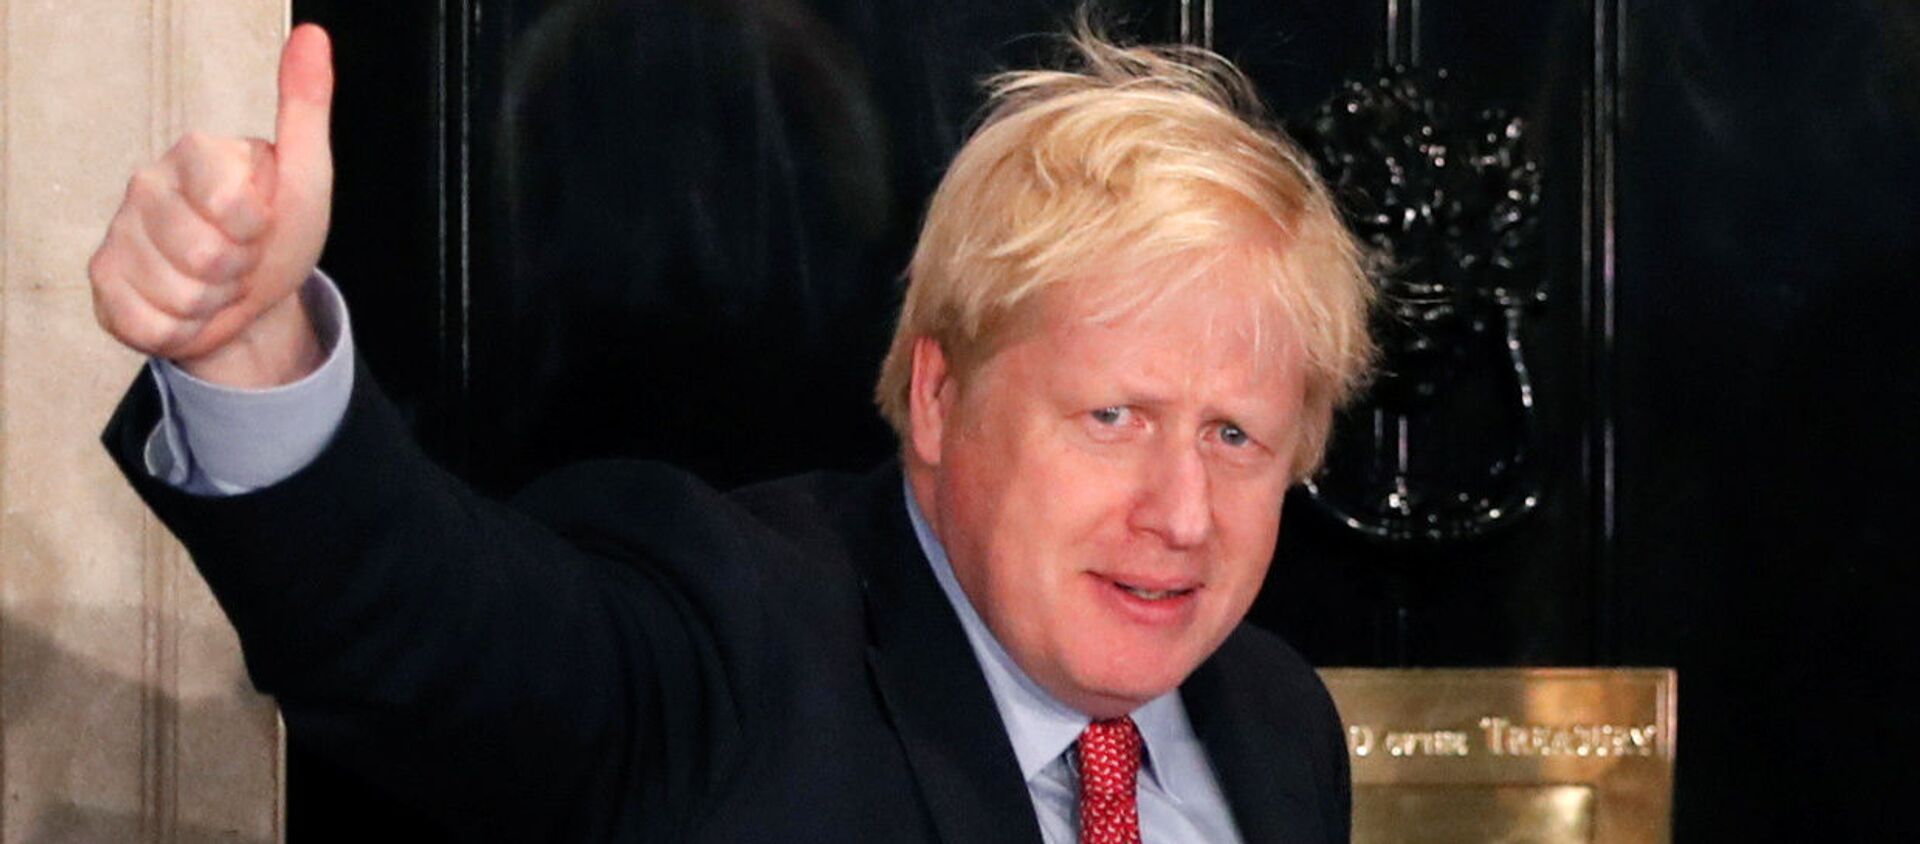 Britain's Prime Minister Boris Johnson gestures as he arrives at 10 Downing Street on the morning after the general election in London, Britain, December 13, 2019 - Sputnik International, 1920, 28.12.2019